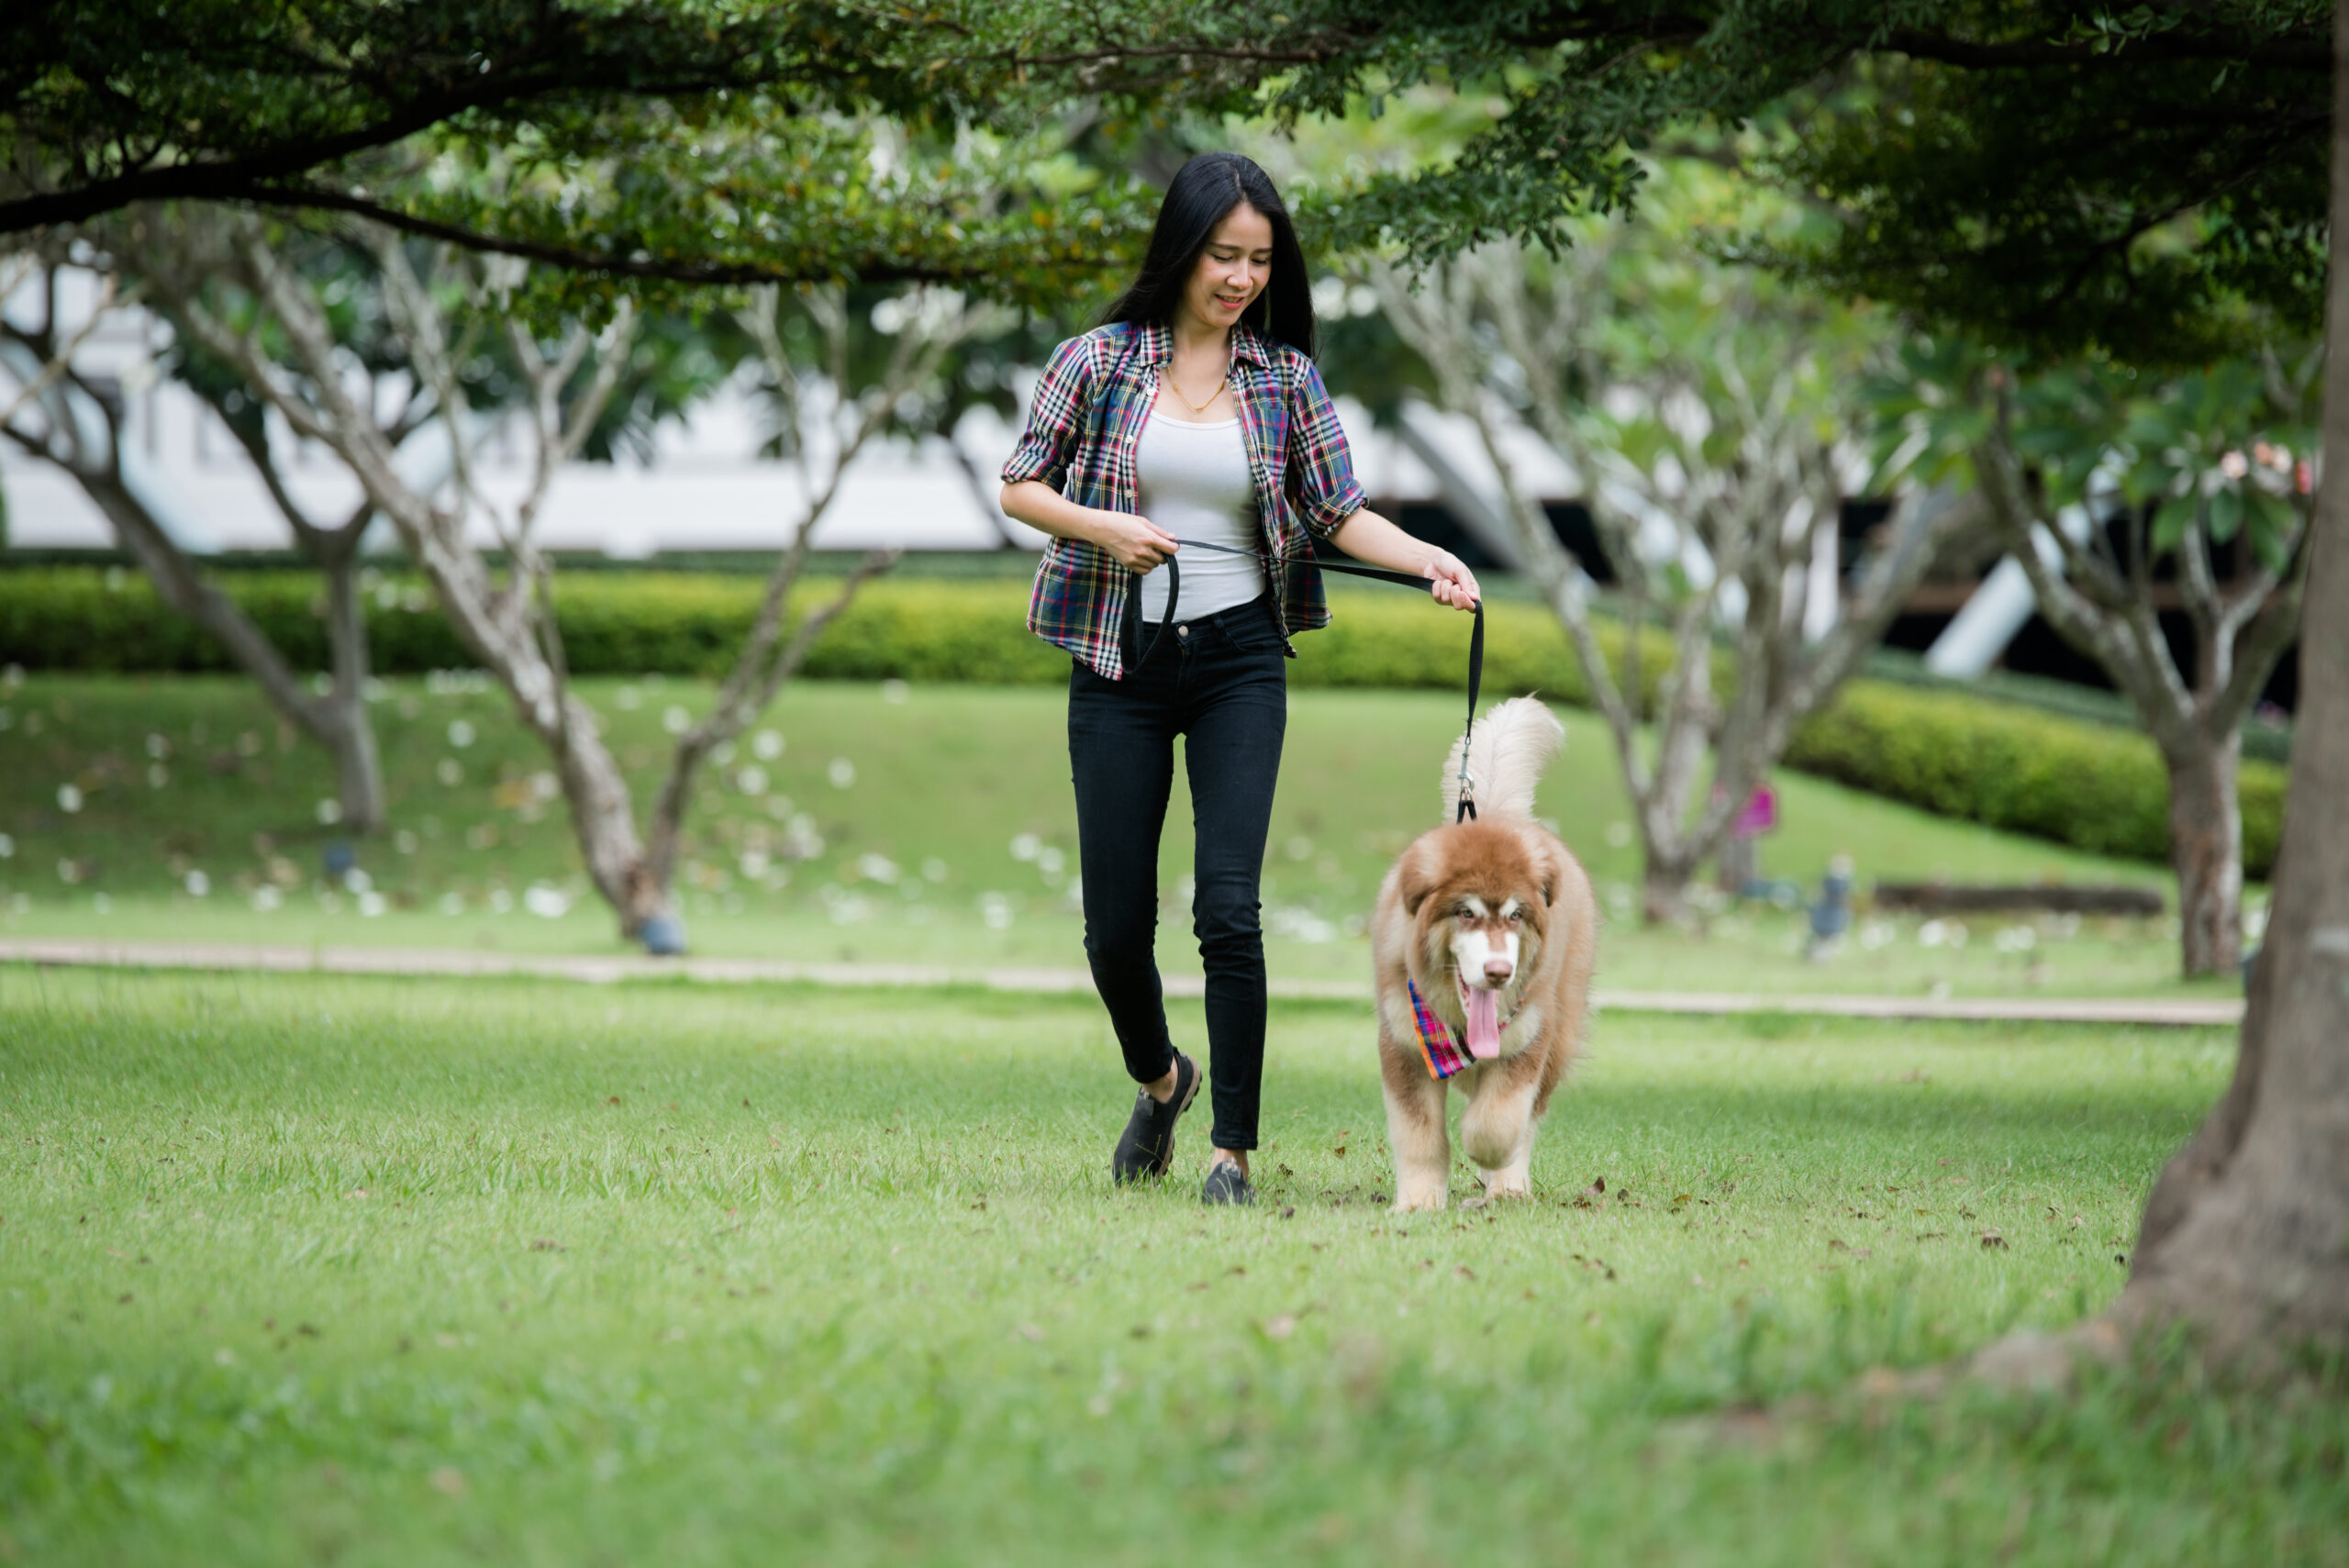 Beautiful young woman playing with her dog in a park